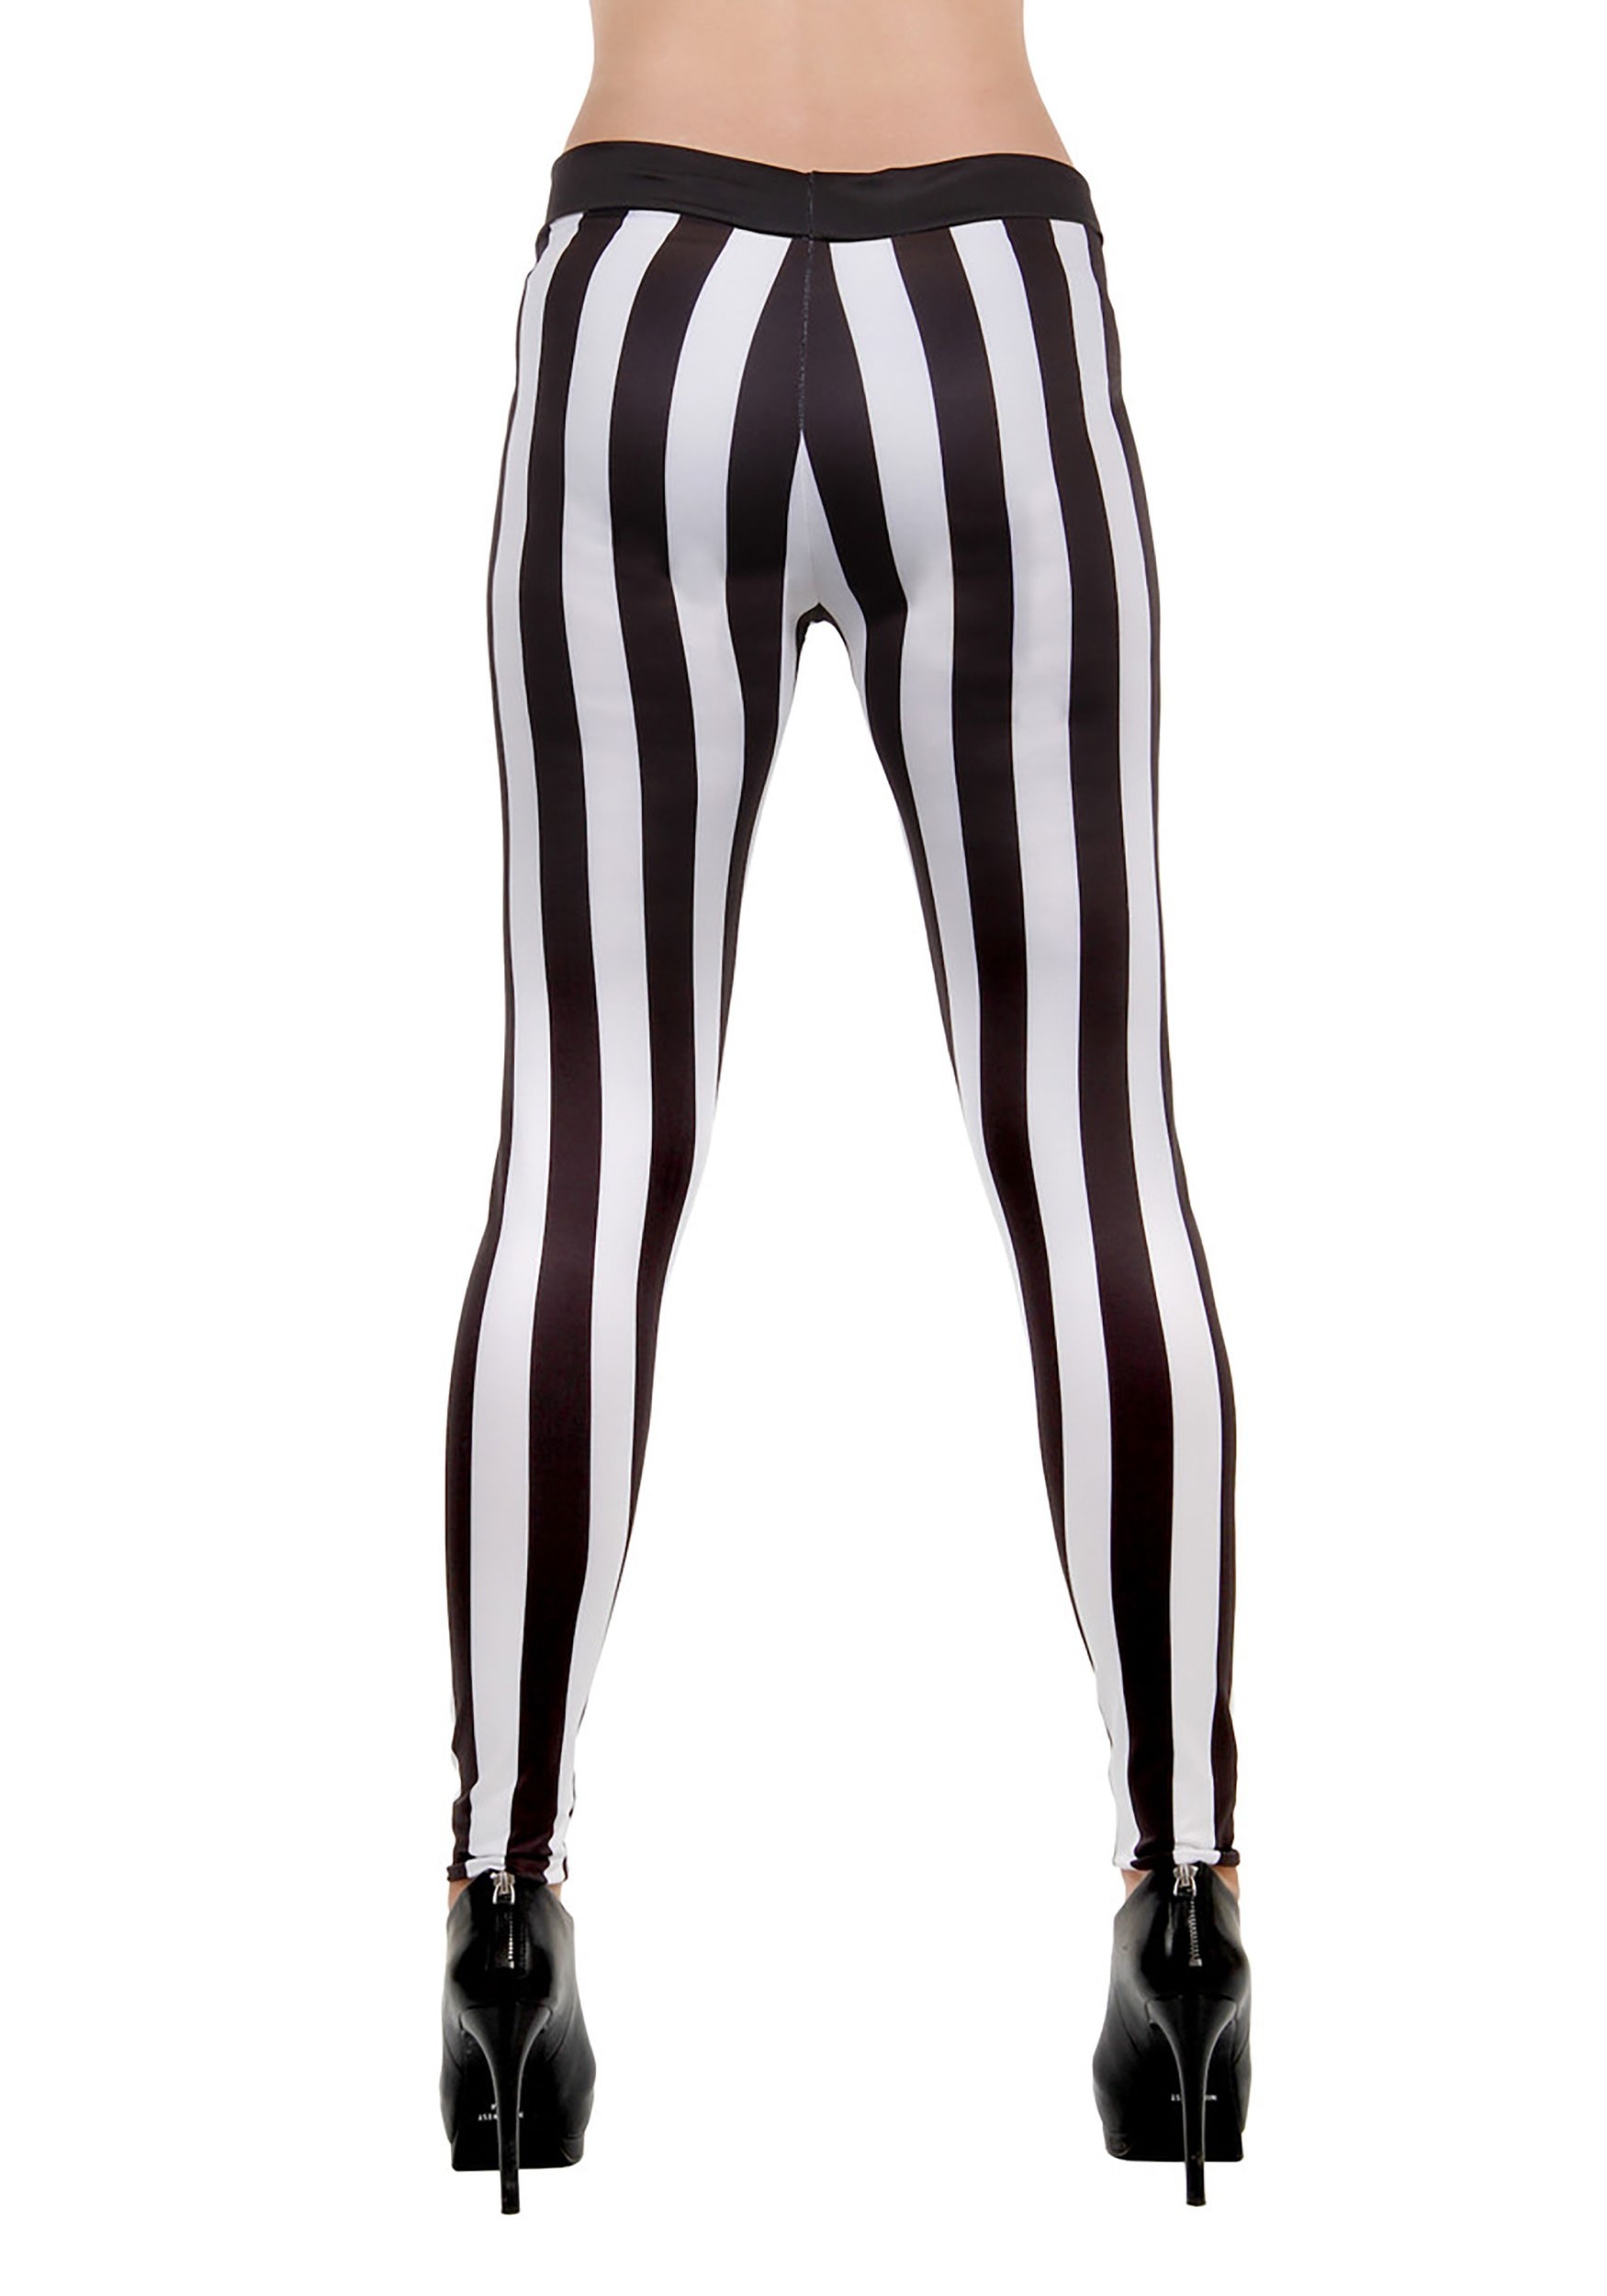 SpuunaW Cotton Leggings for Women Stretch Leggings for Women Plus Size Sexy  Leggings Women Leggings Fashion Work Out Pants for Women Black and White  Striped Leggings Women Daily Deals Fall Leggings at